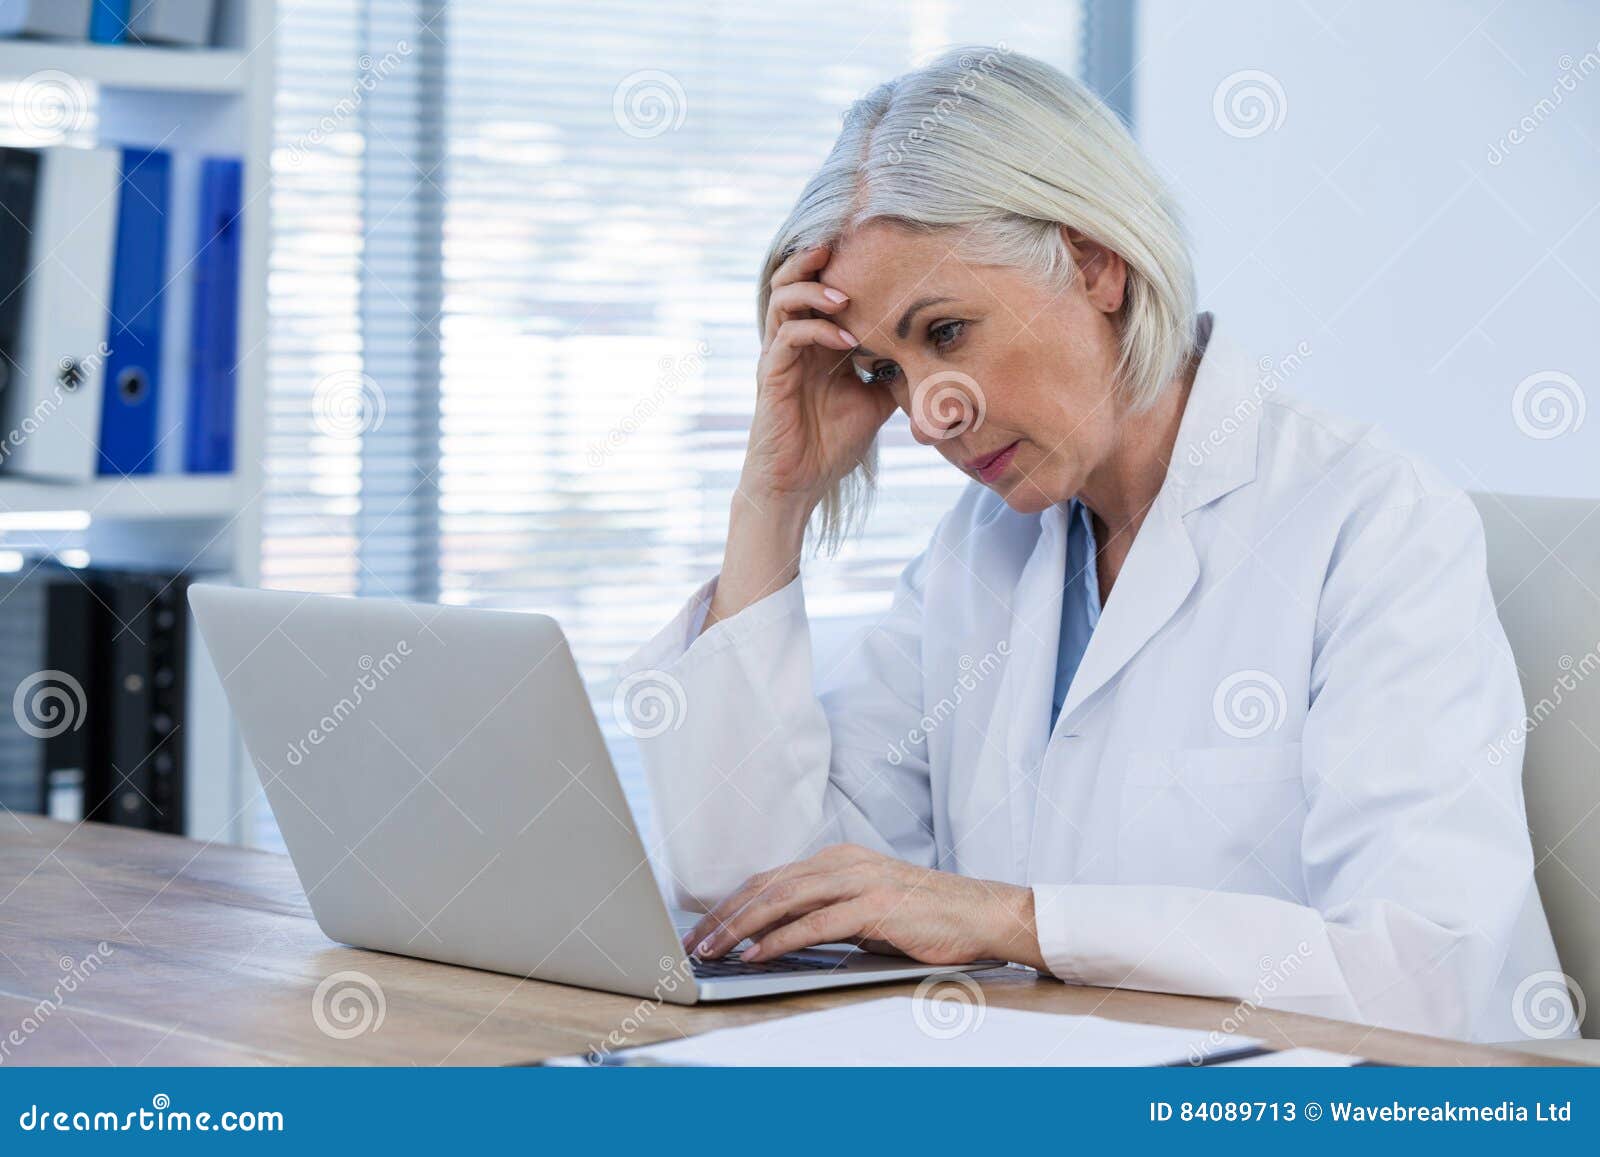 tense female doctor working on her laptop